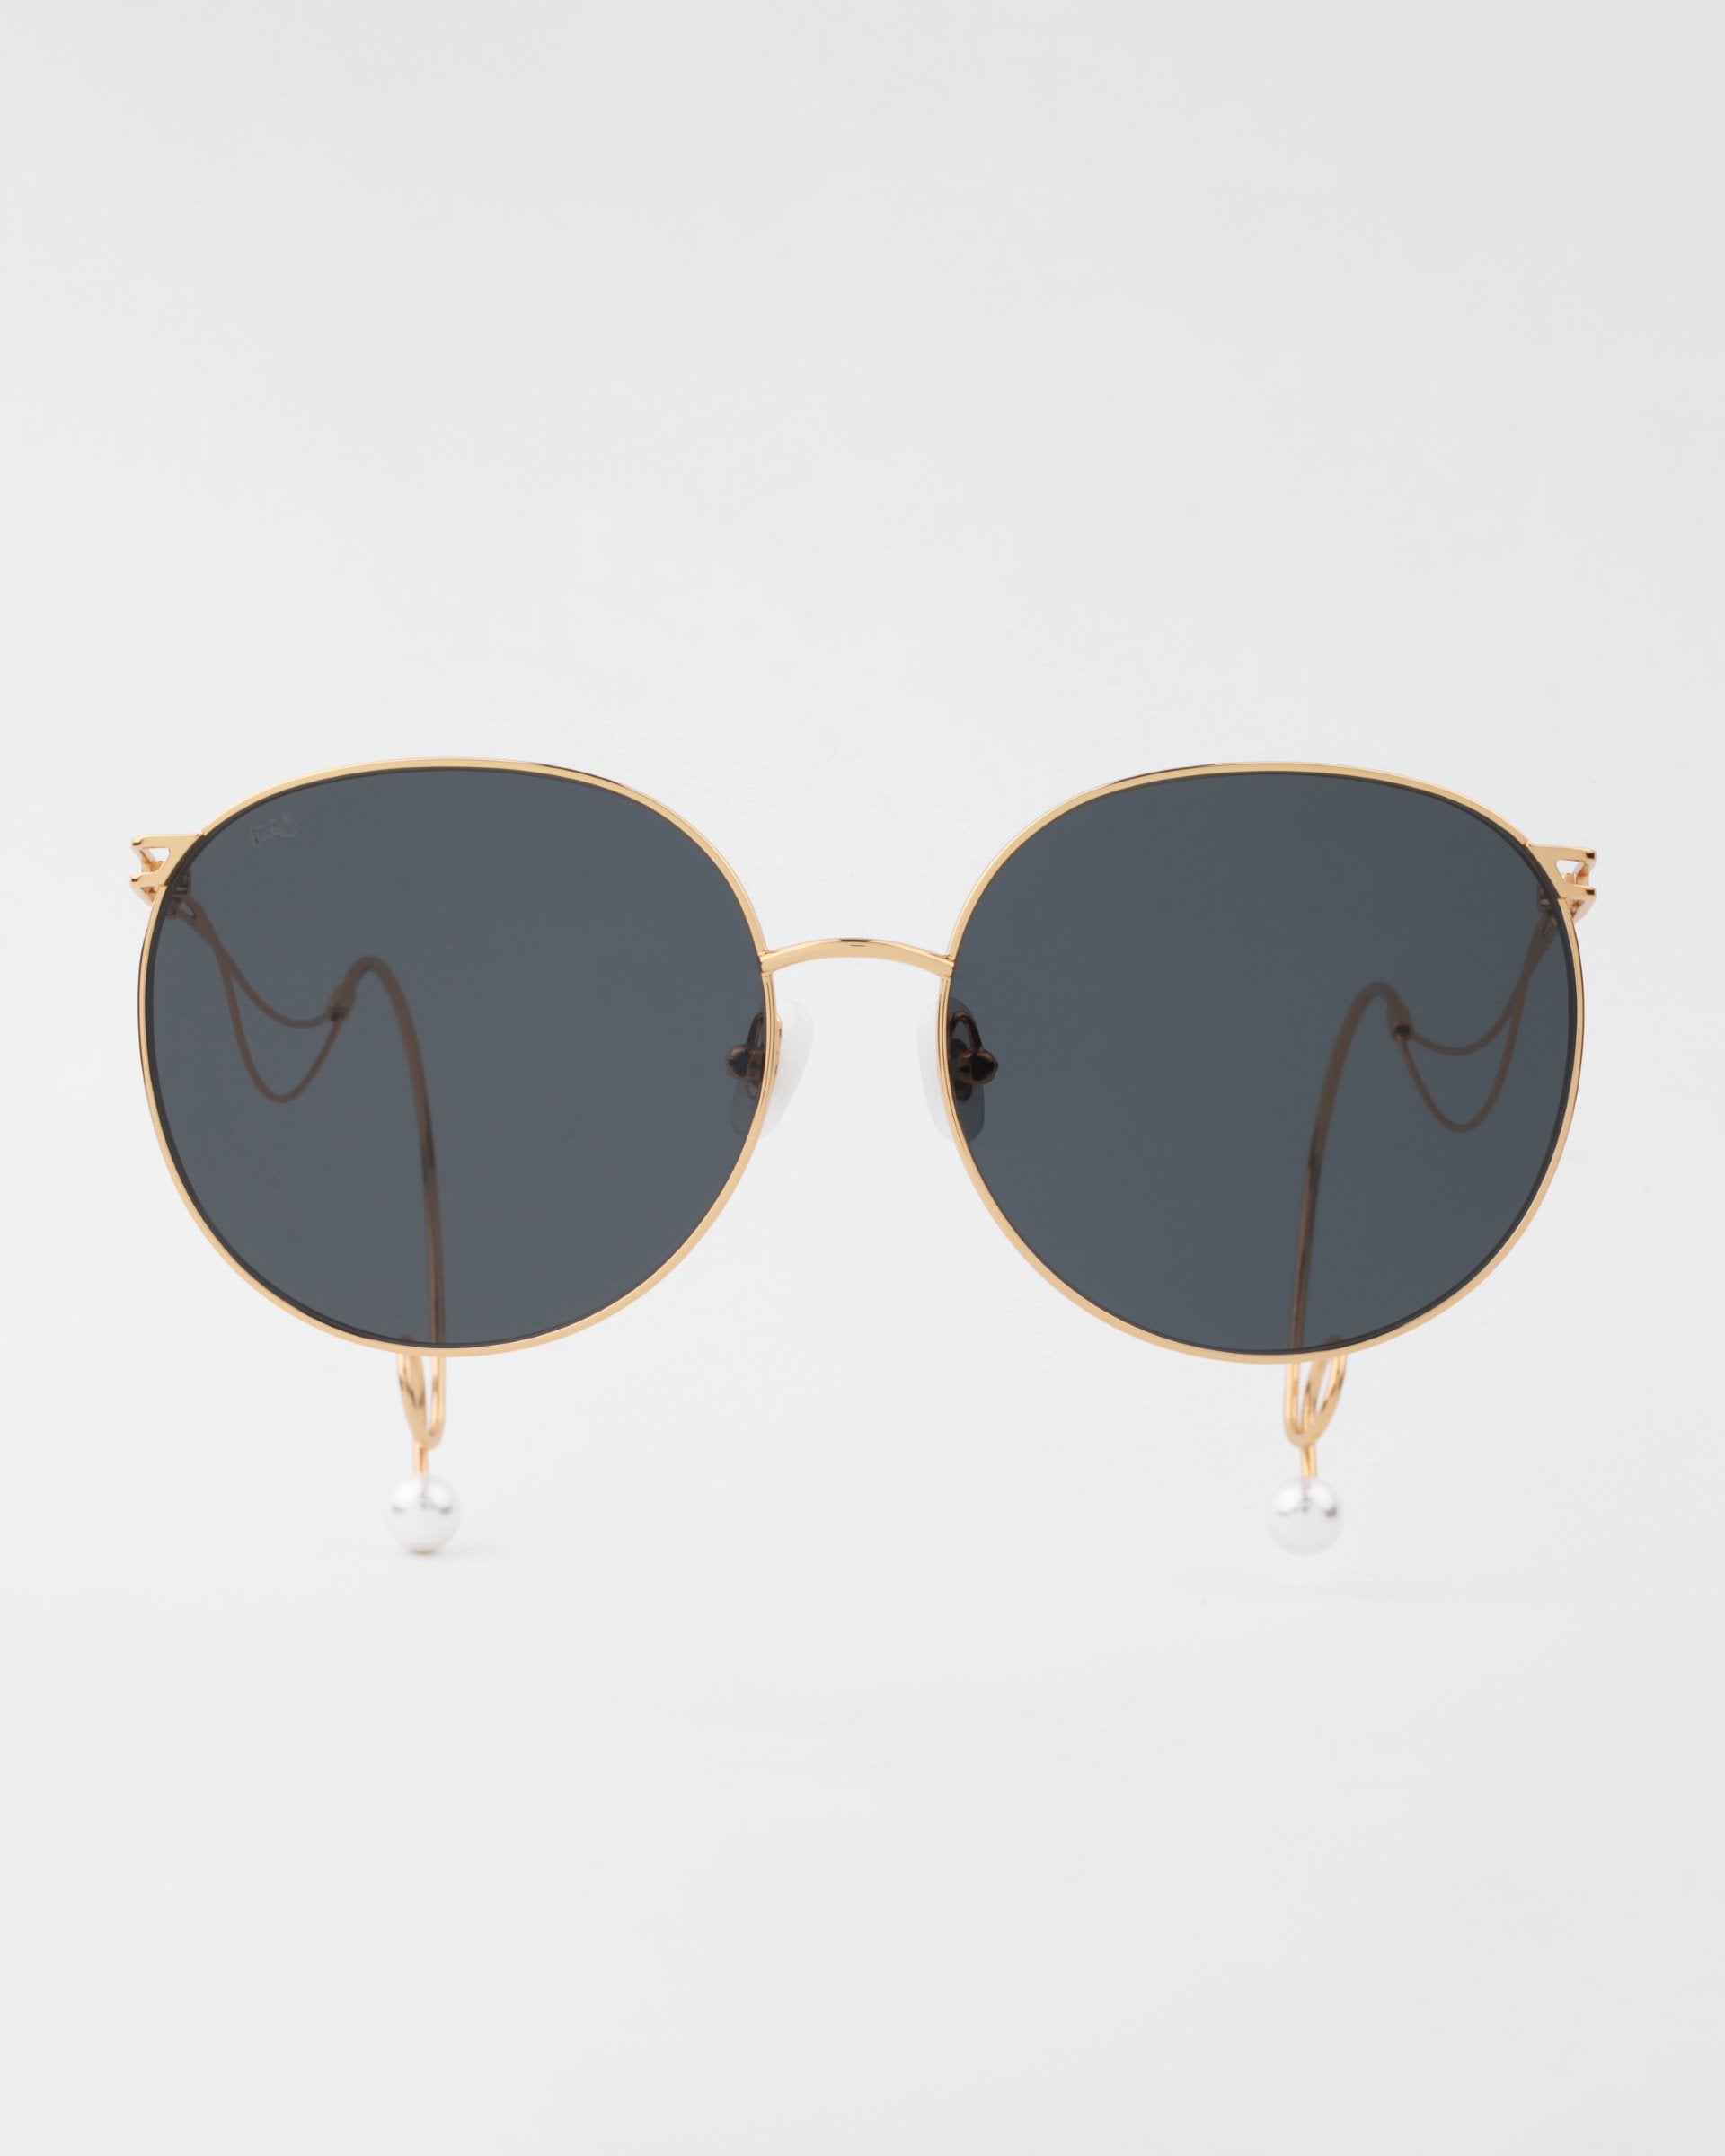 A pair of stylish sunglasses with round, dark, lightweight shatter-resistant lenses and a thin, gold metal frame. The temples feature gold chains with pearl ends attached, hanging down on each side. These Birthday Cake sunglasses by For Art&#39;s Sake® are set against a plain white background.